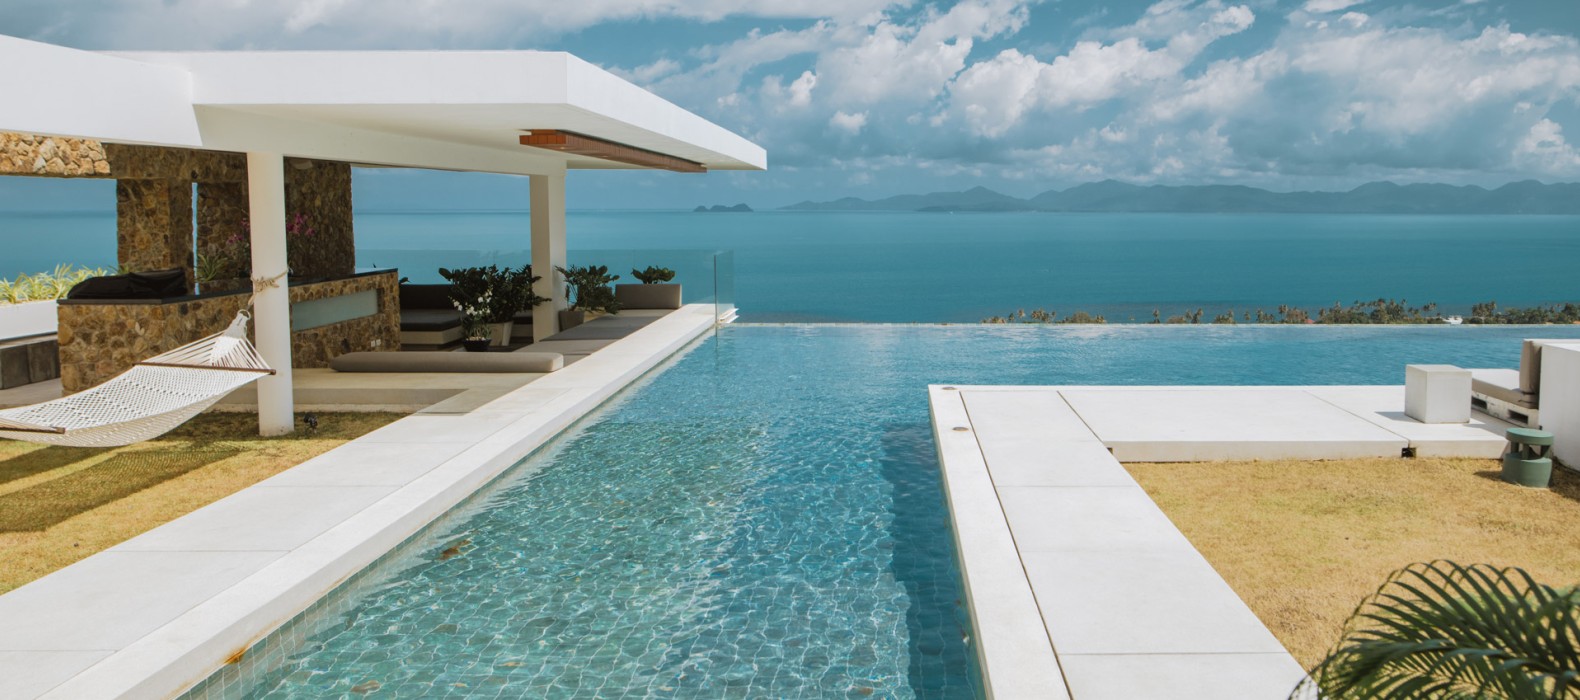 Exterior pool view of Villa Palace of Thailand in Koh Samui